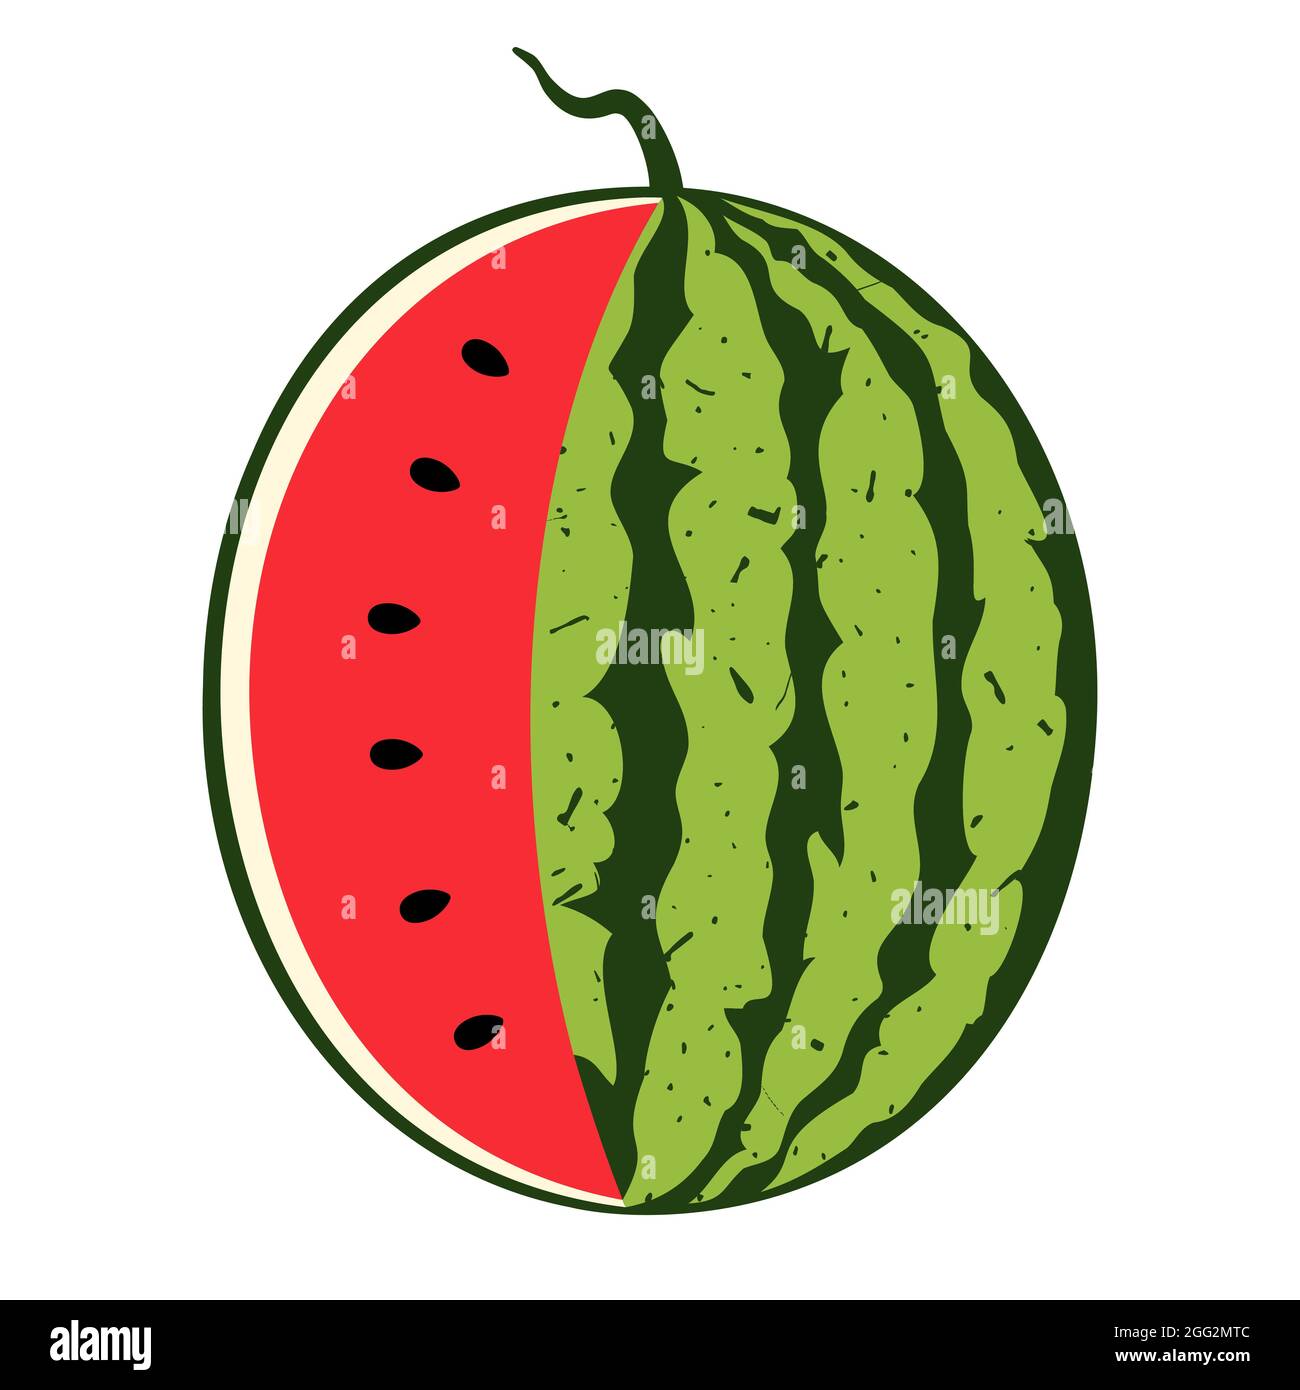 Juicy watermelon. Summer fruit illustration isolated on white background. Stock Vector